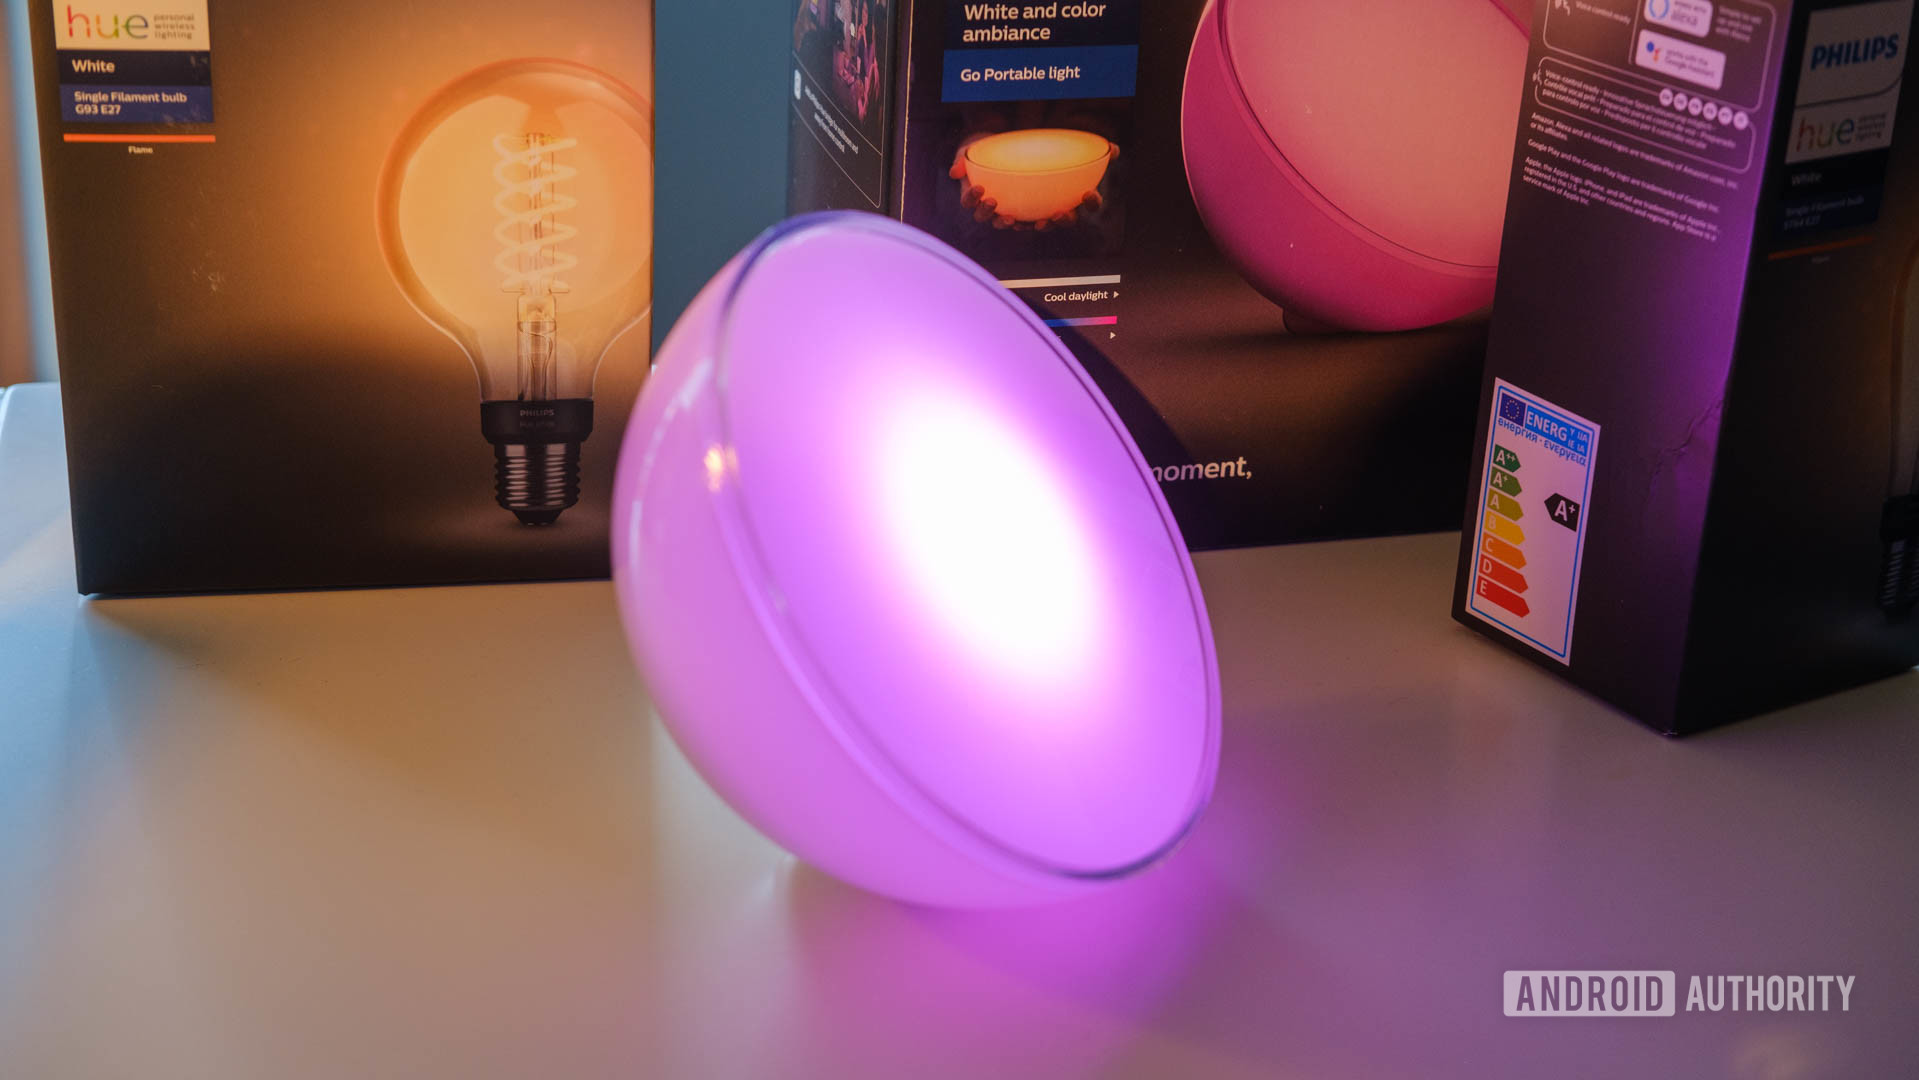 Smart Lamps These Are The 10 Best Ones, Hue Go Portable Table Lamp